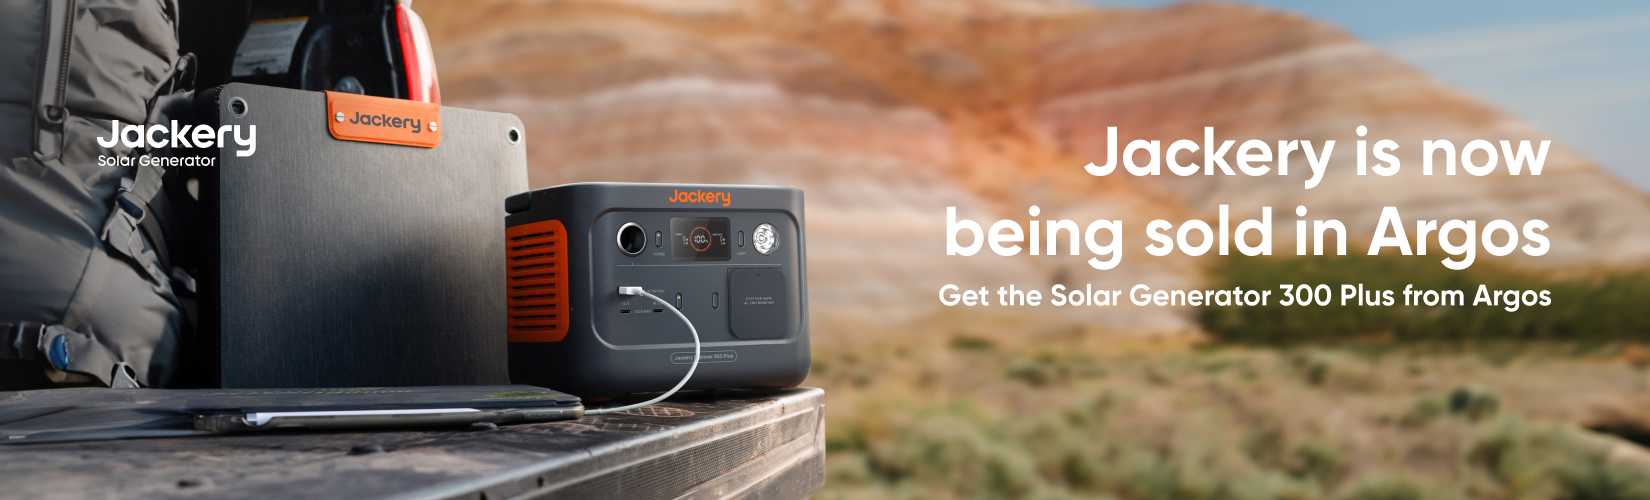 Jackery is now being sold in Argos. Get the Solar Generator 300 Plus from Argos.